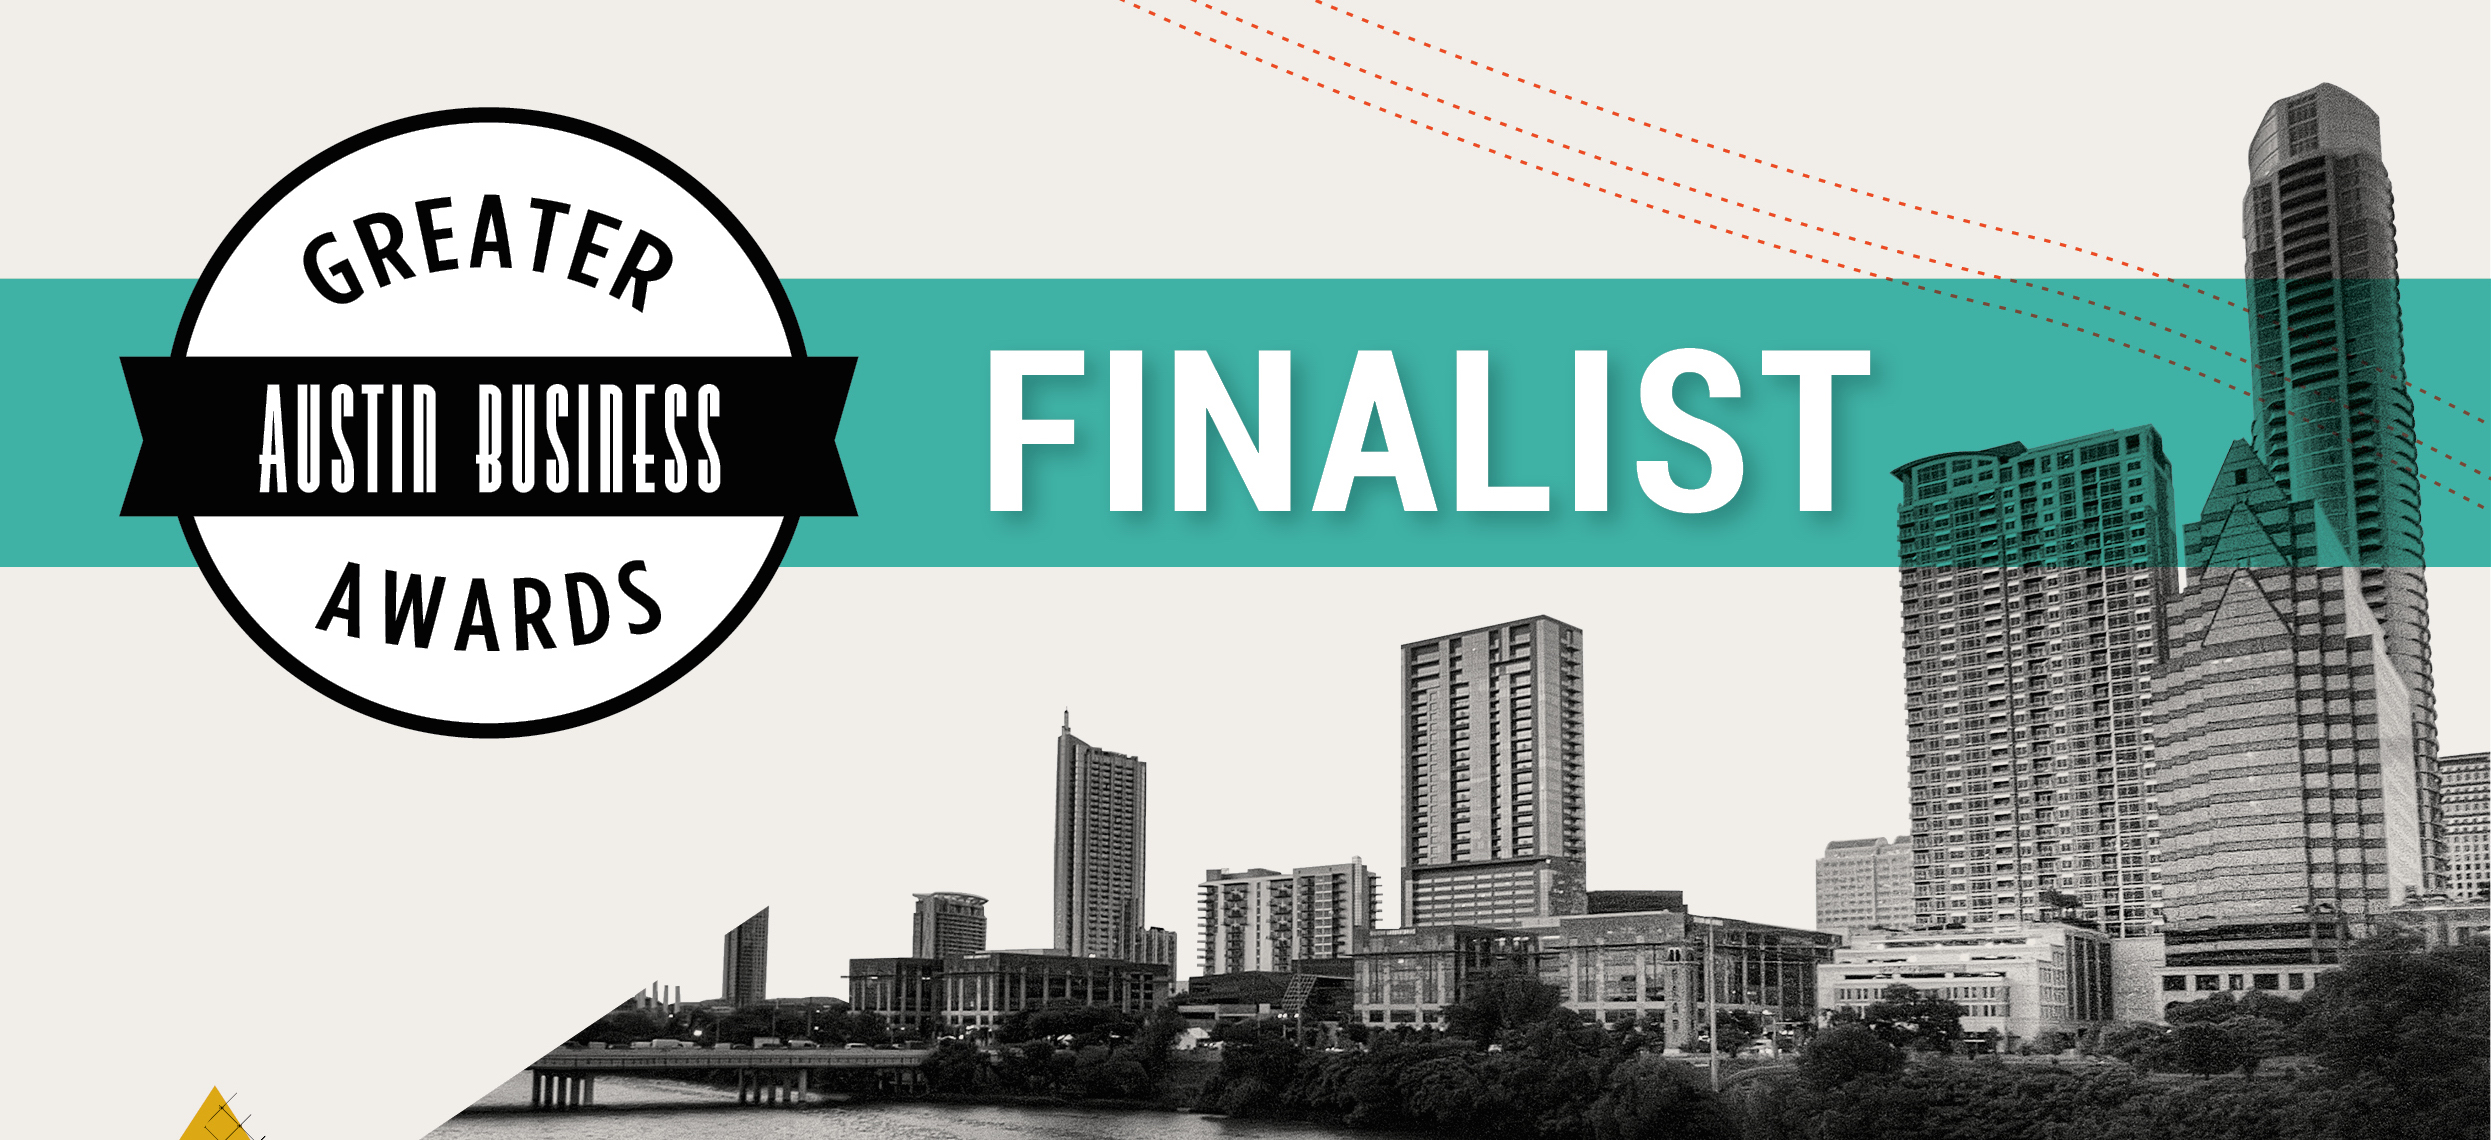 Greater Austin Business Awards – Here We Come!